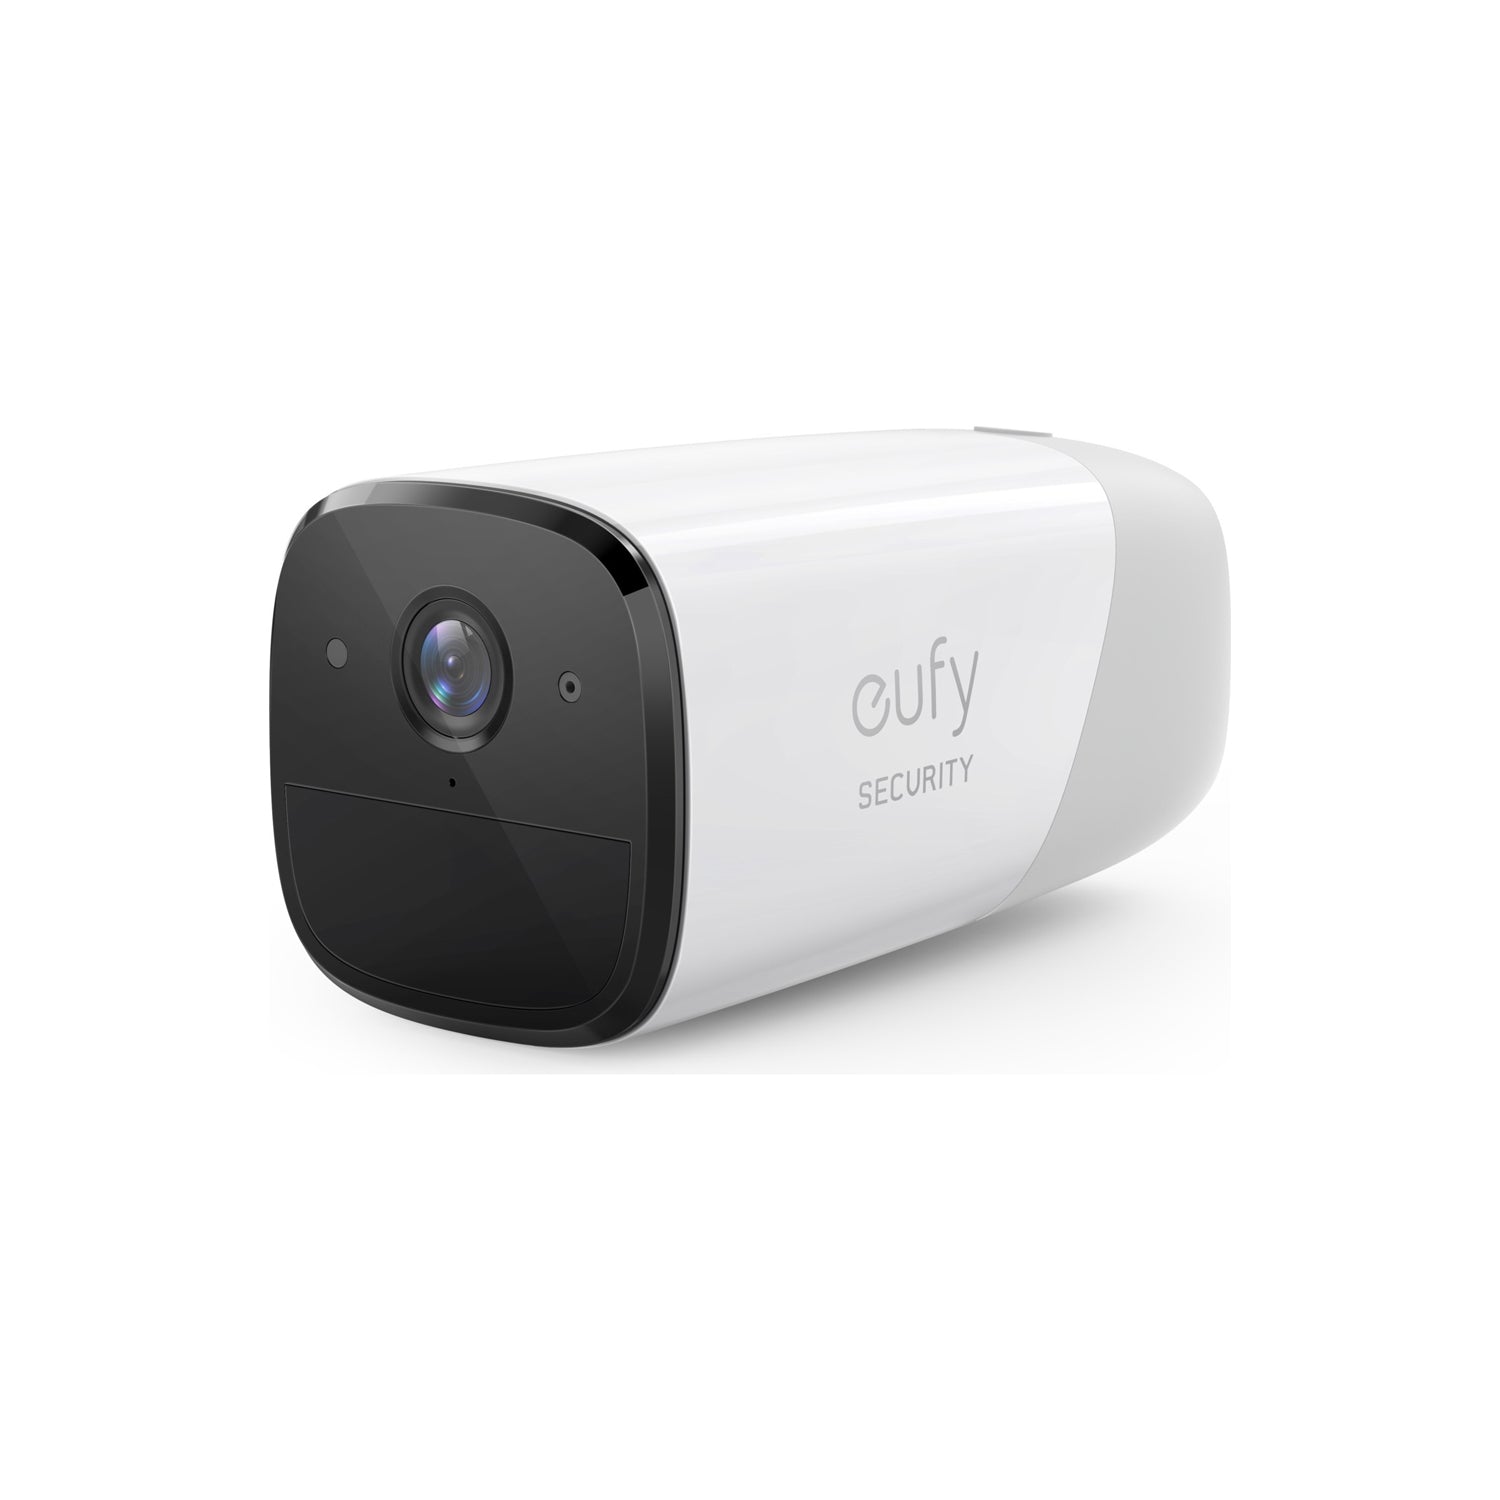 Anker eufy Security eufyCam 2 Pro Home Security Camera with Night Vision